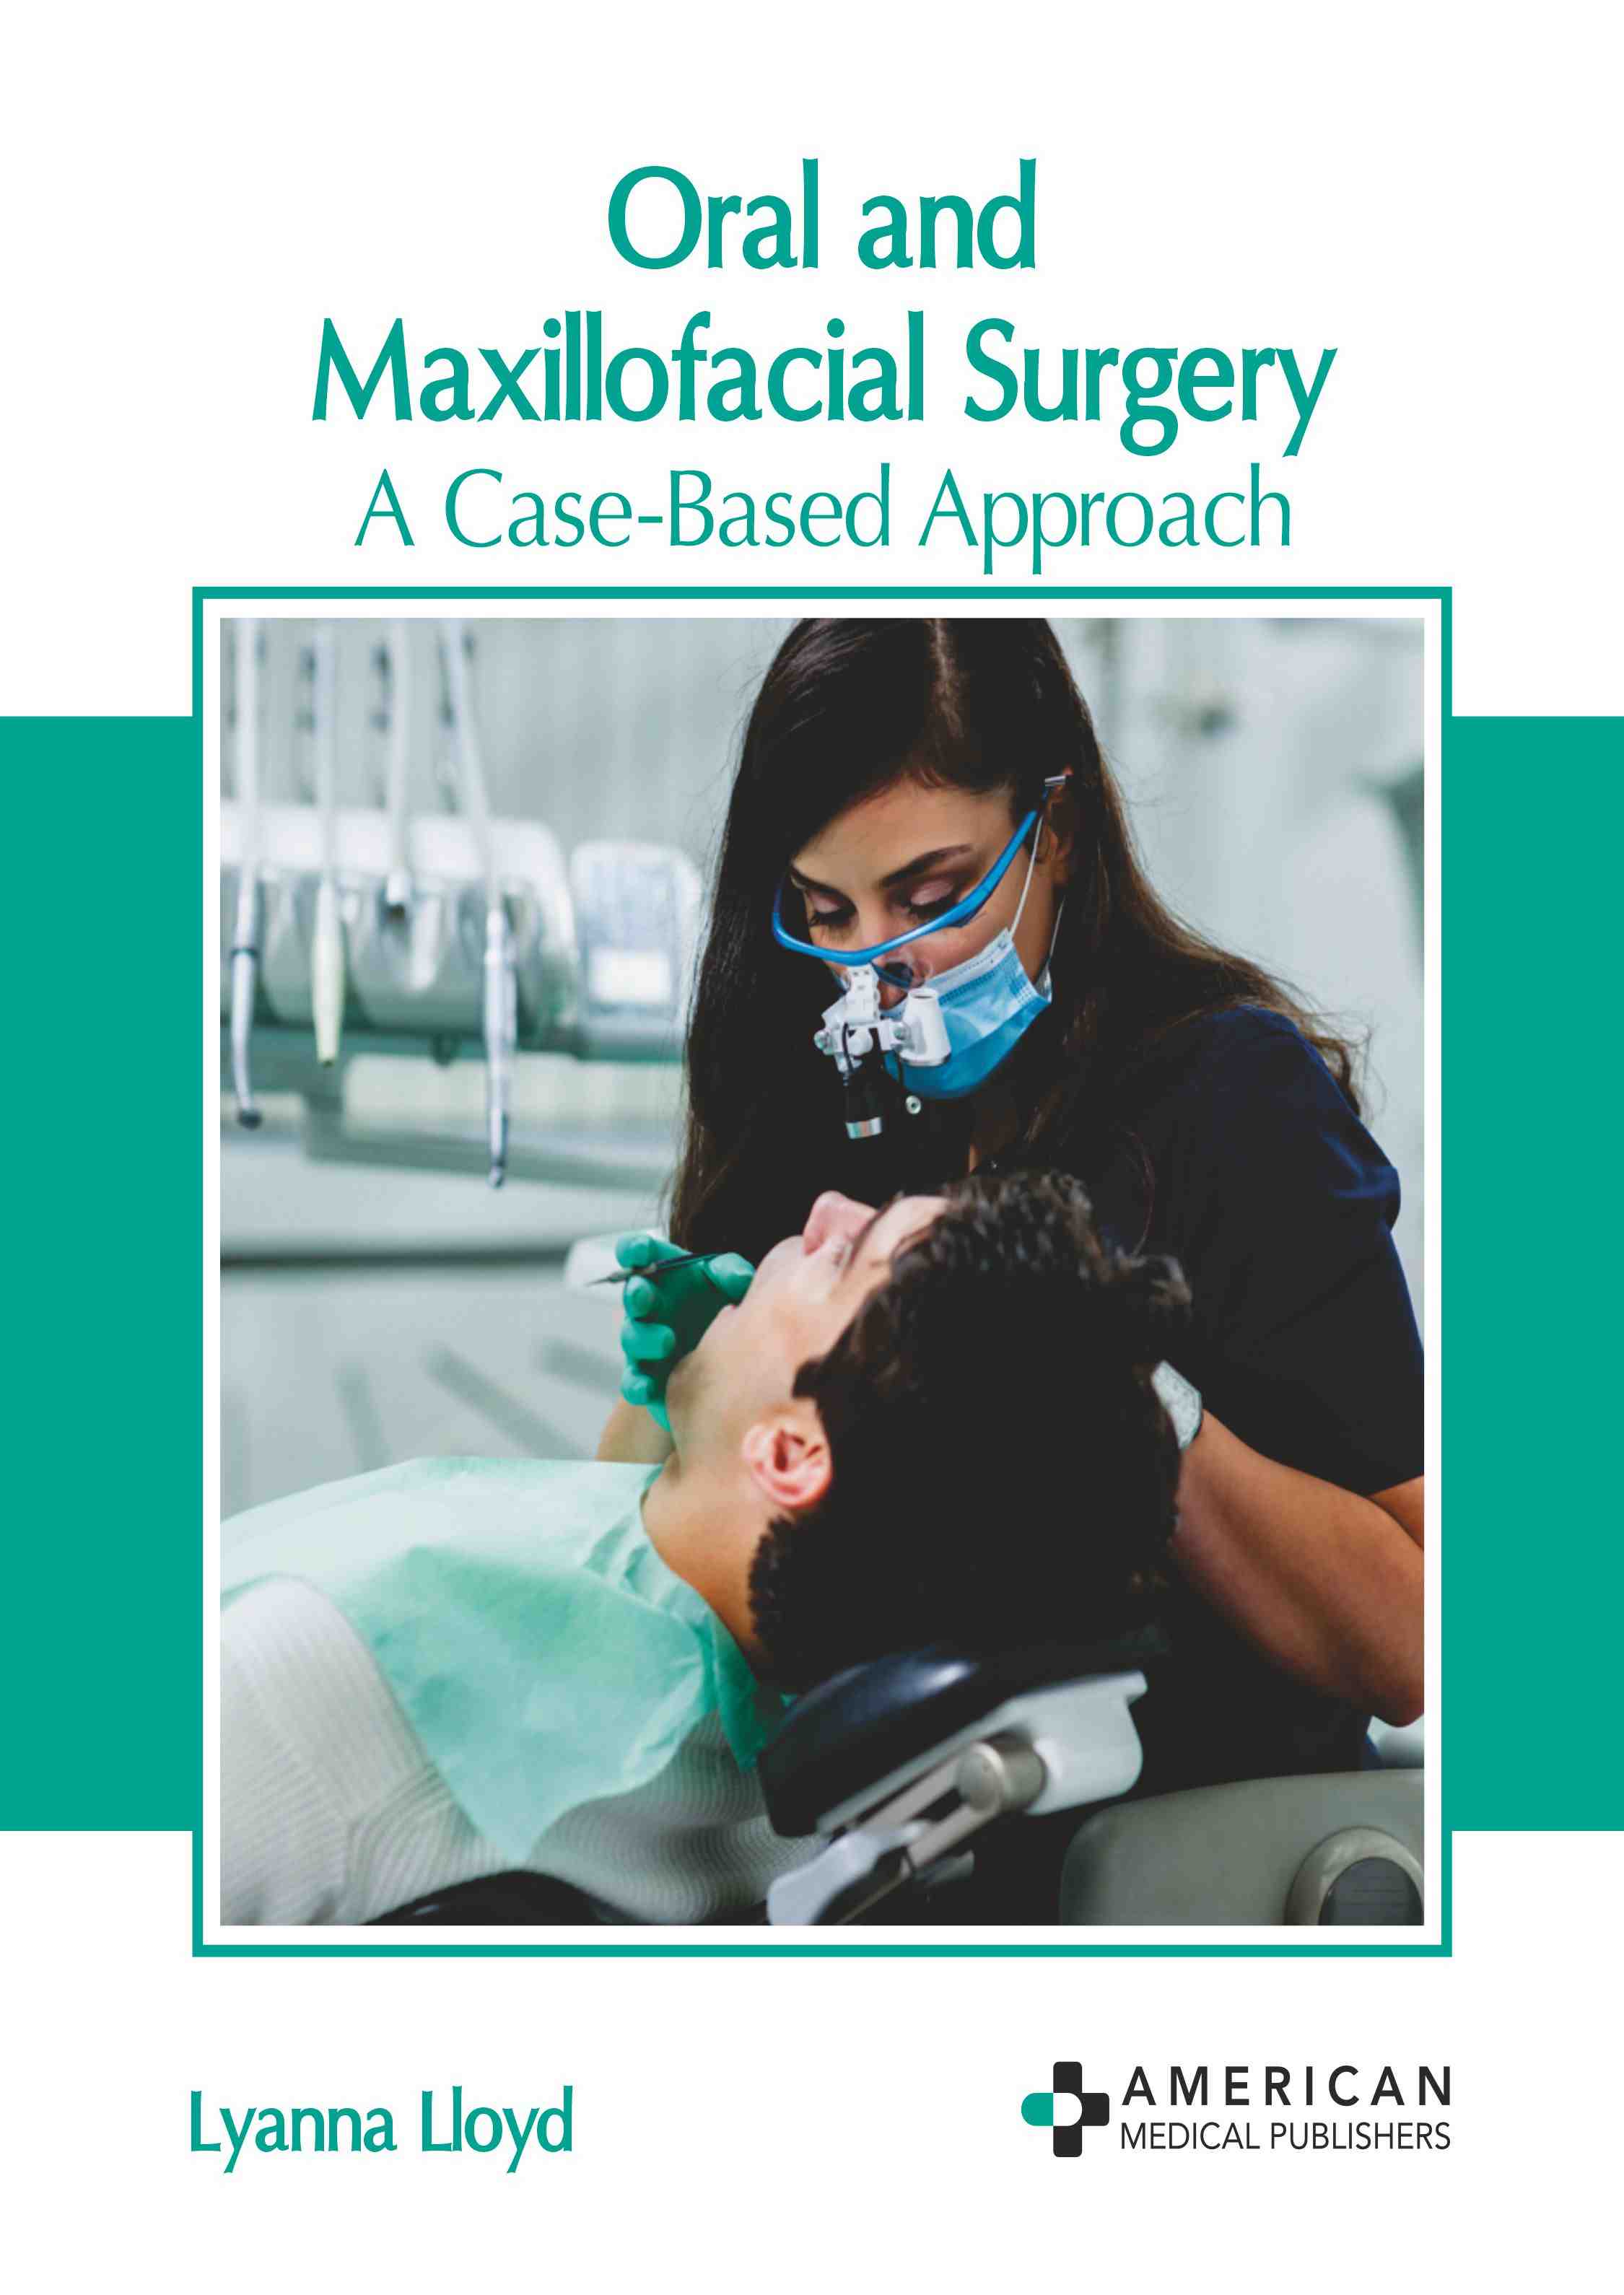 

exclusive-publishers/american-medical-publishers/oral-and-maxillofacial-surgery-a-case-based-approach-9798887406510